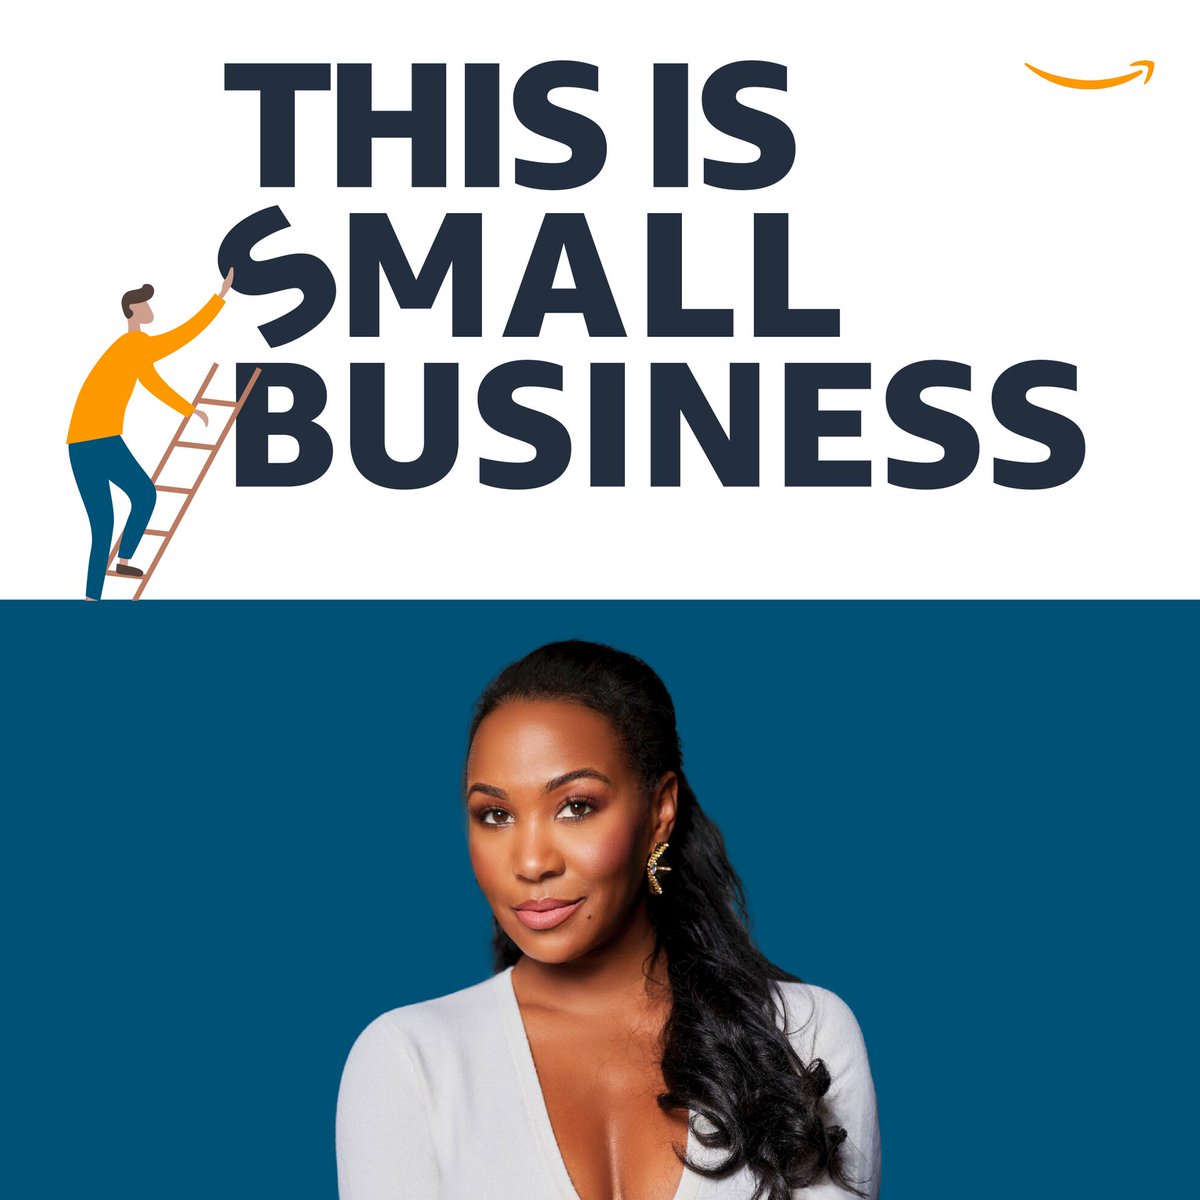 Products can be amazing #Storytellers! Don't believe us? Check out this episode of This Is Small Business from @Amazon, which features @HarlemCandles CEO, Teri Johnson, who uses her products to tell important stories of Black history. link.chtbl.com/TISB?sid=socia…